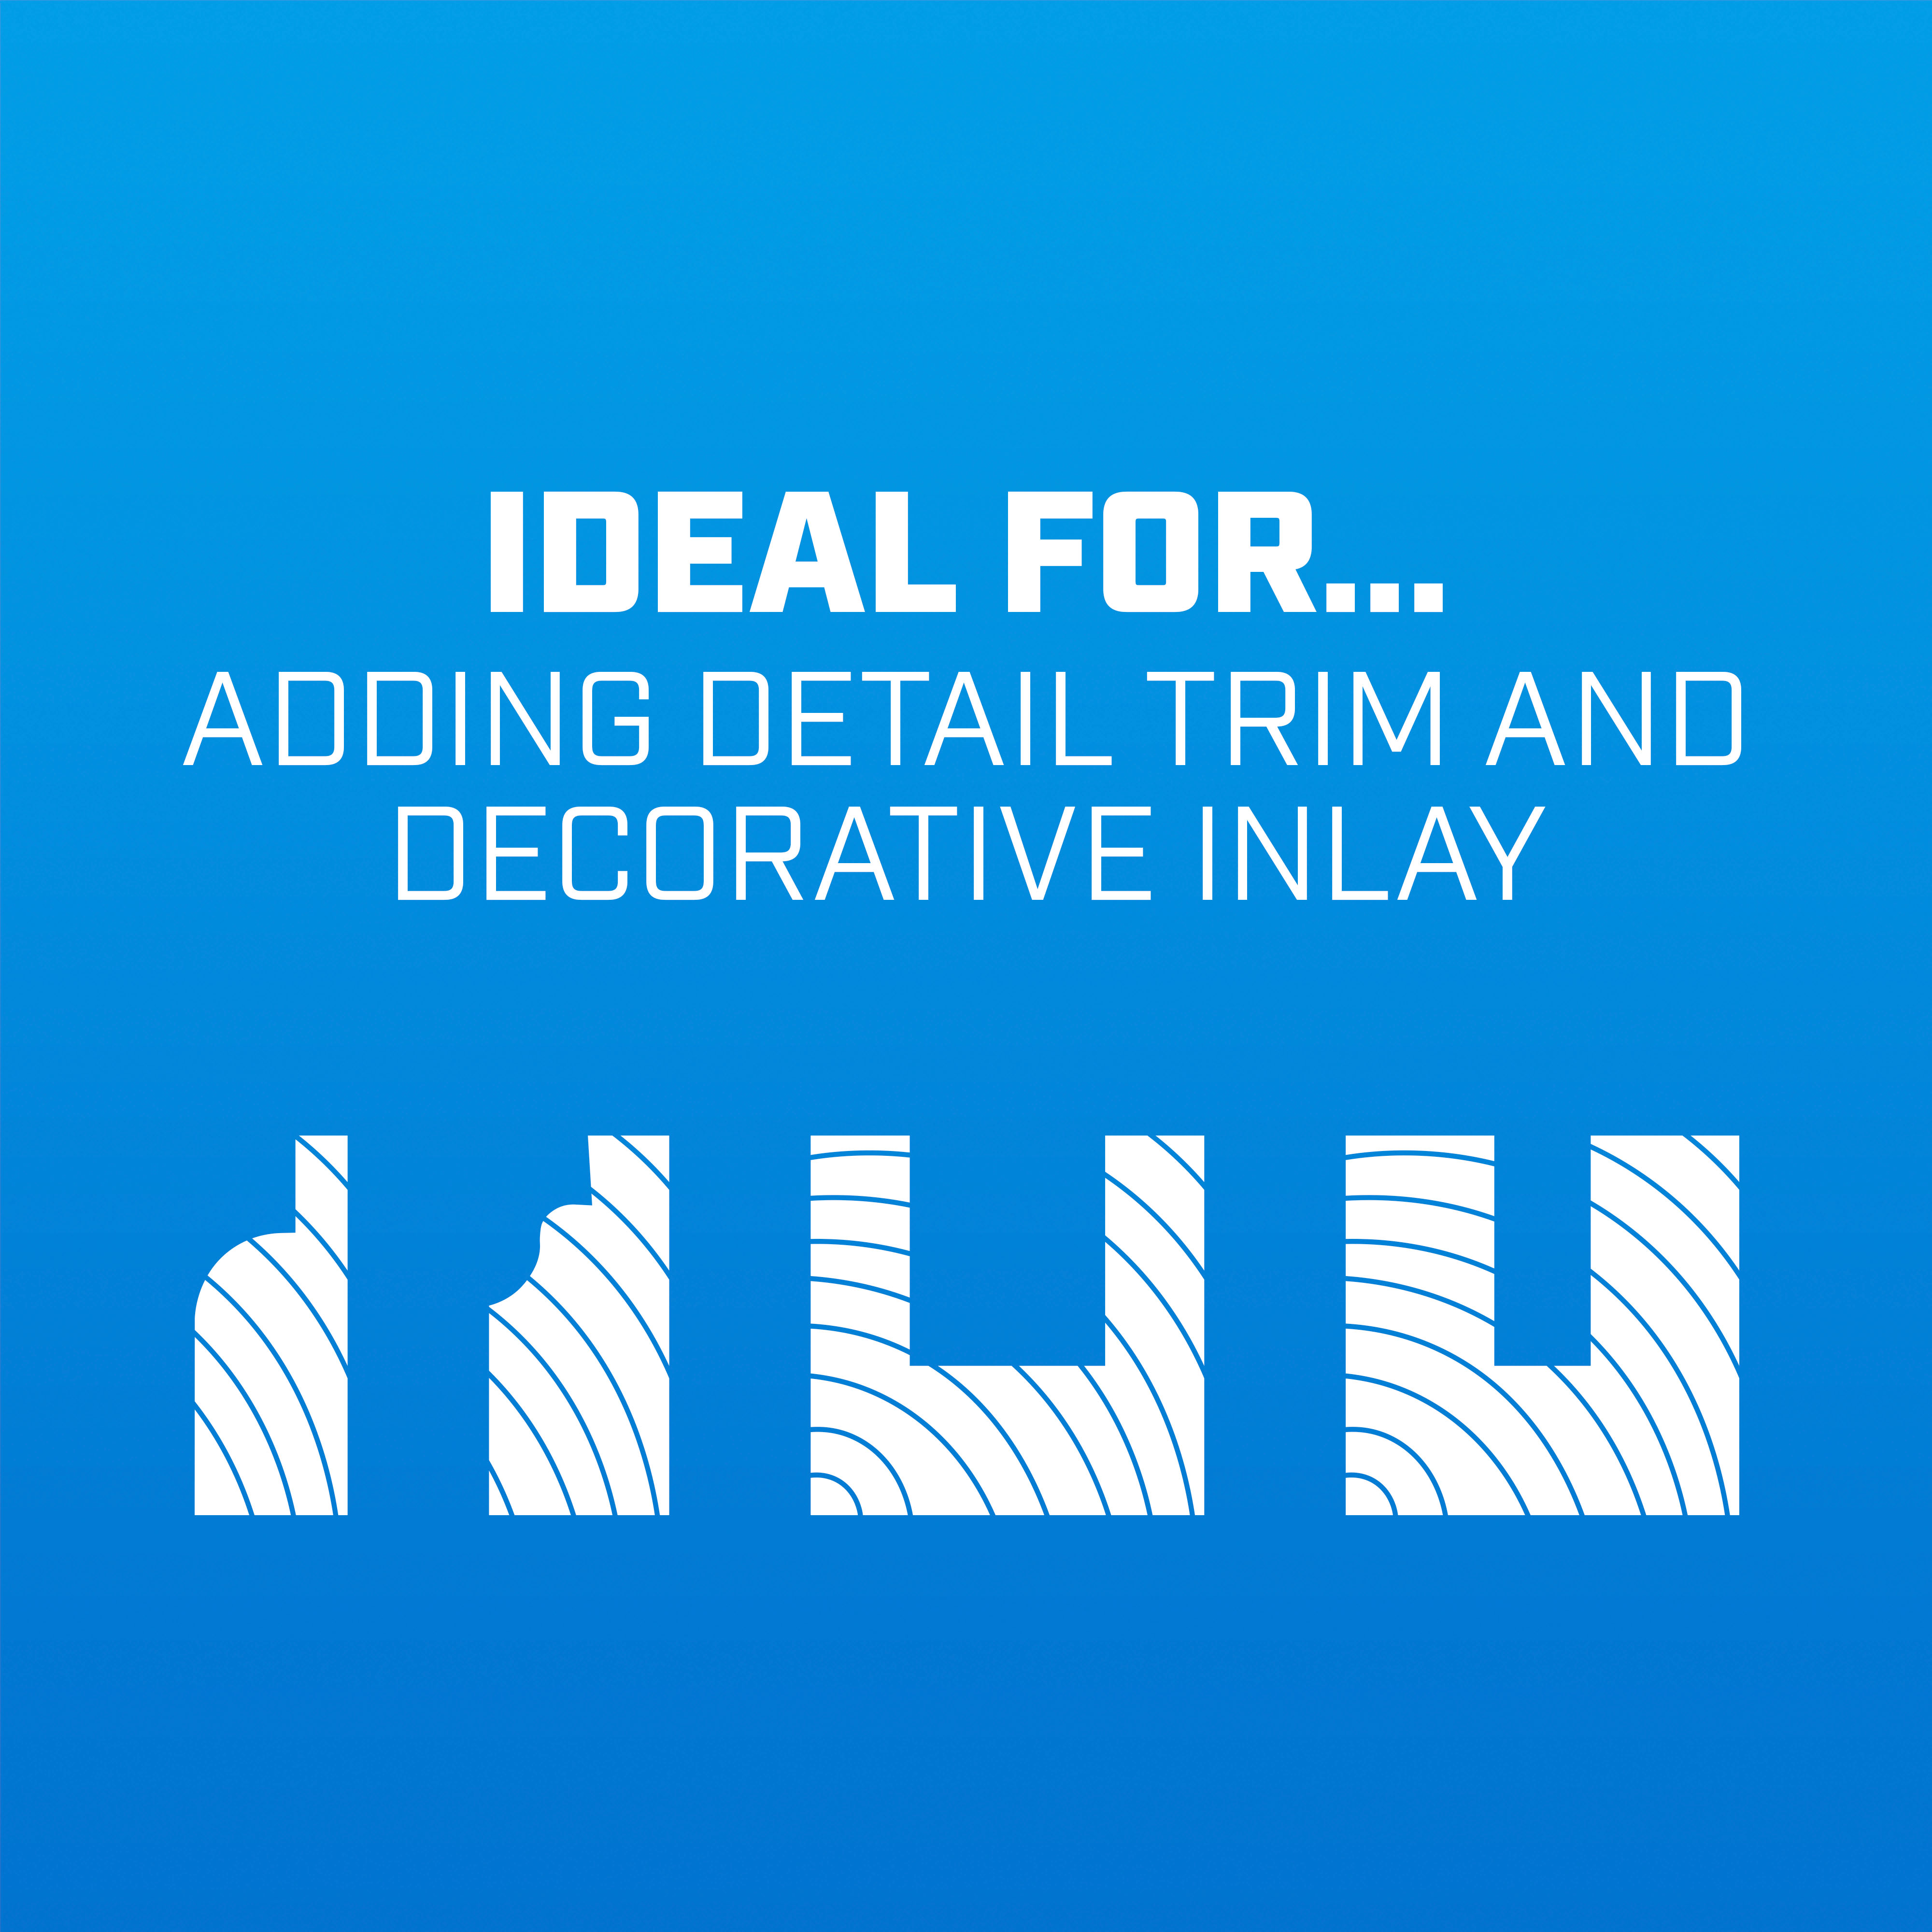 Ideal for adding detail trim and decorative inlay